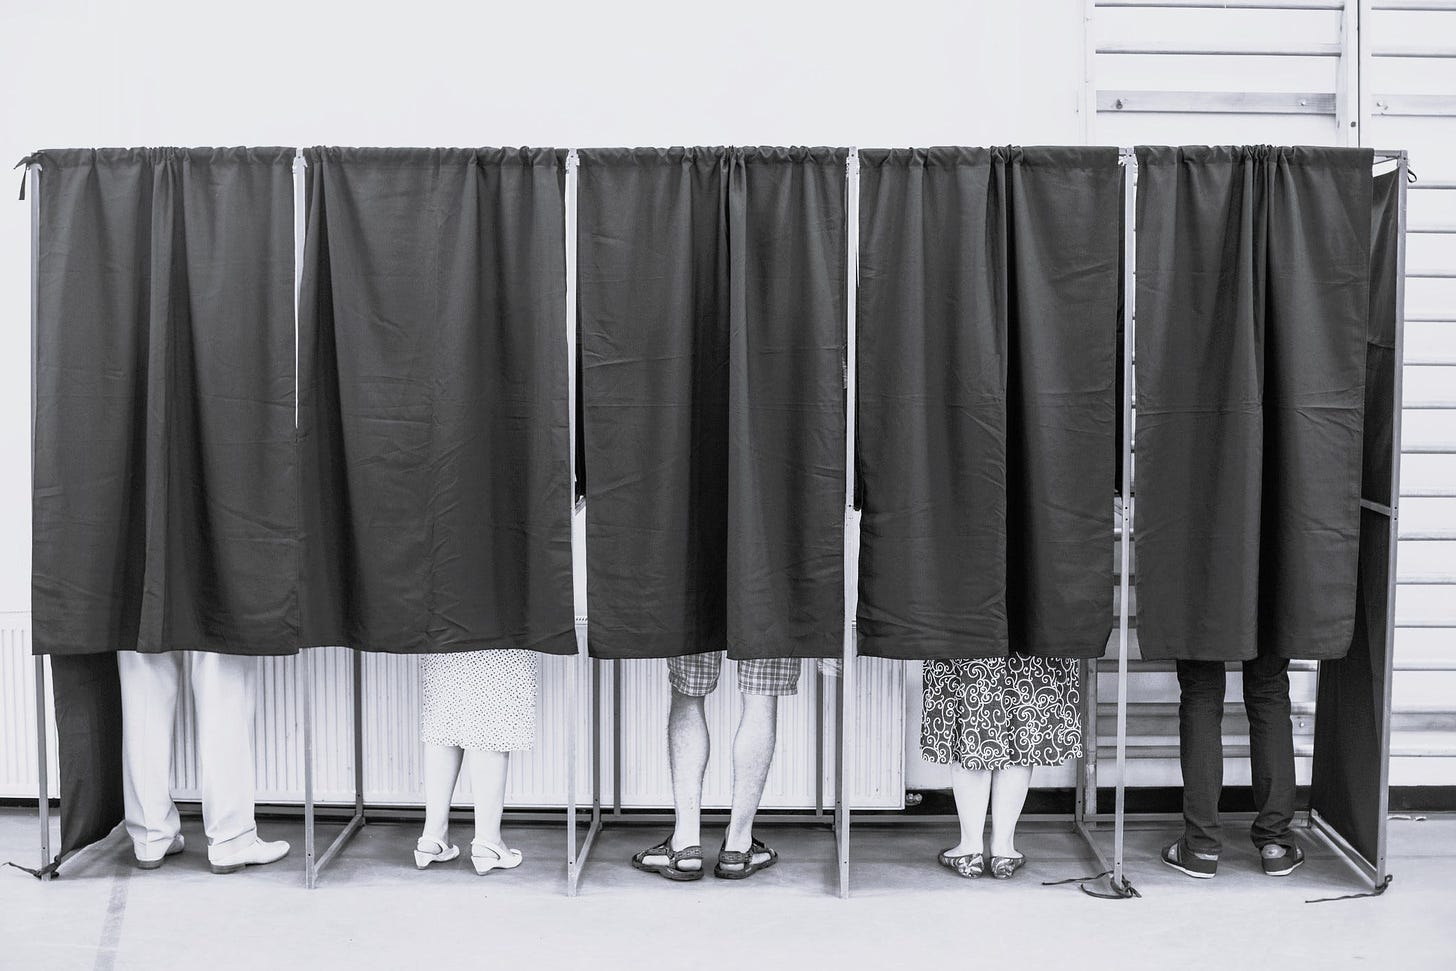 Image of voters inside booths with closed curtains. Only their feed are showing at the bottom.